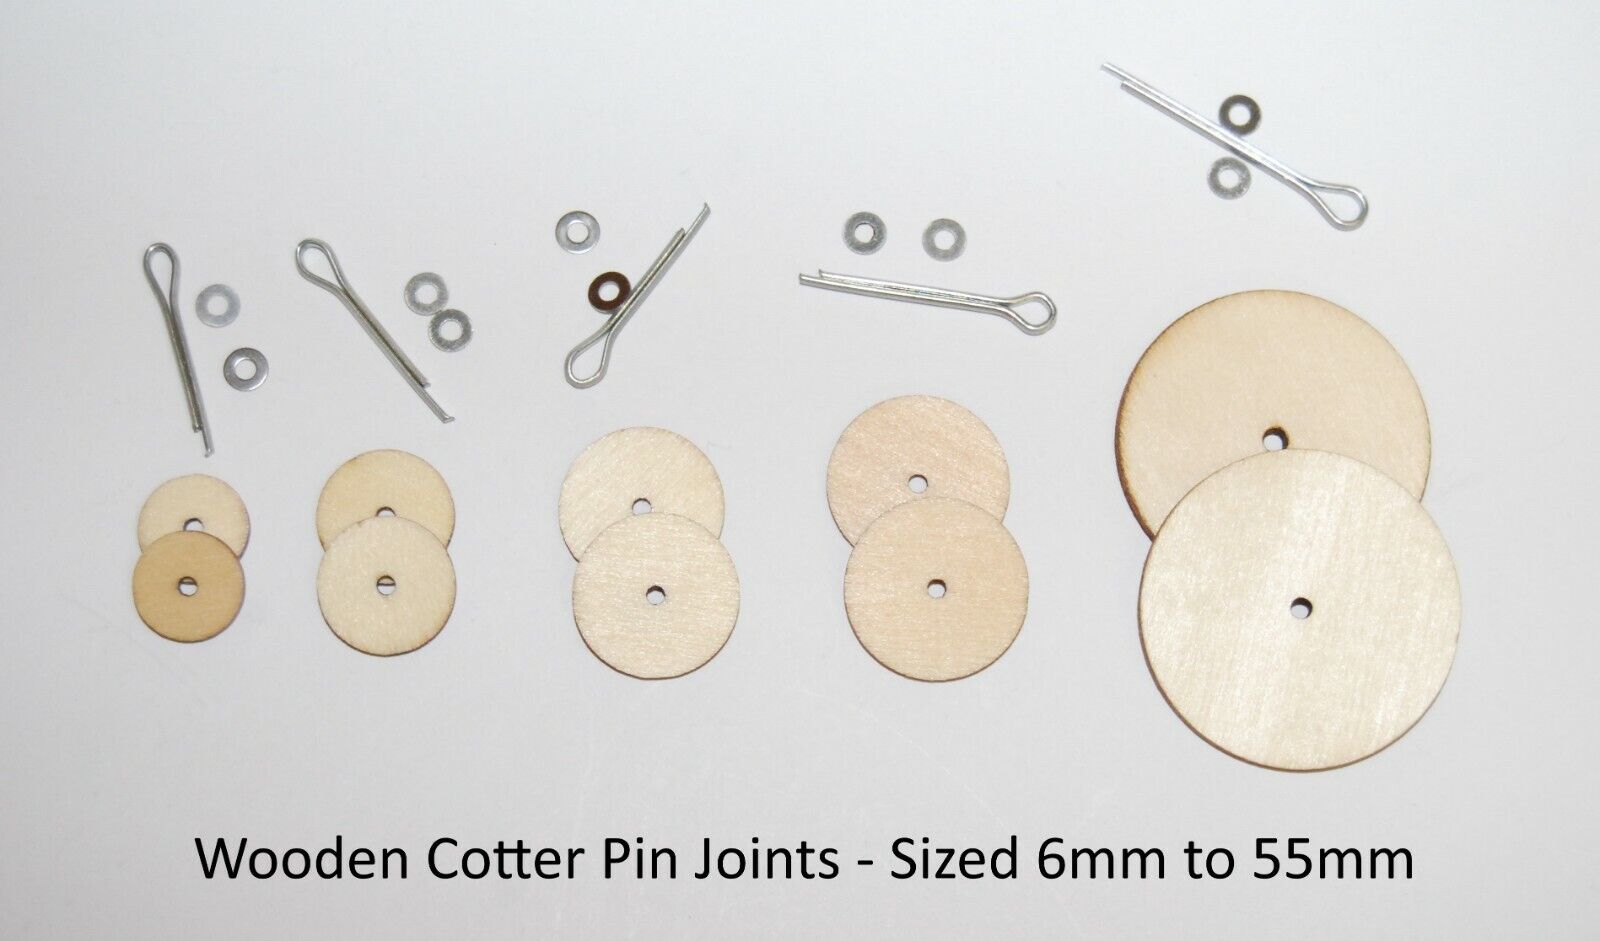 Cotter Pin Joints for Soft Toys & Teddy Crafts - 5 Part Joint Sets- 6mm to 55mm